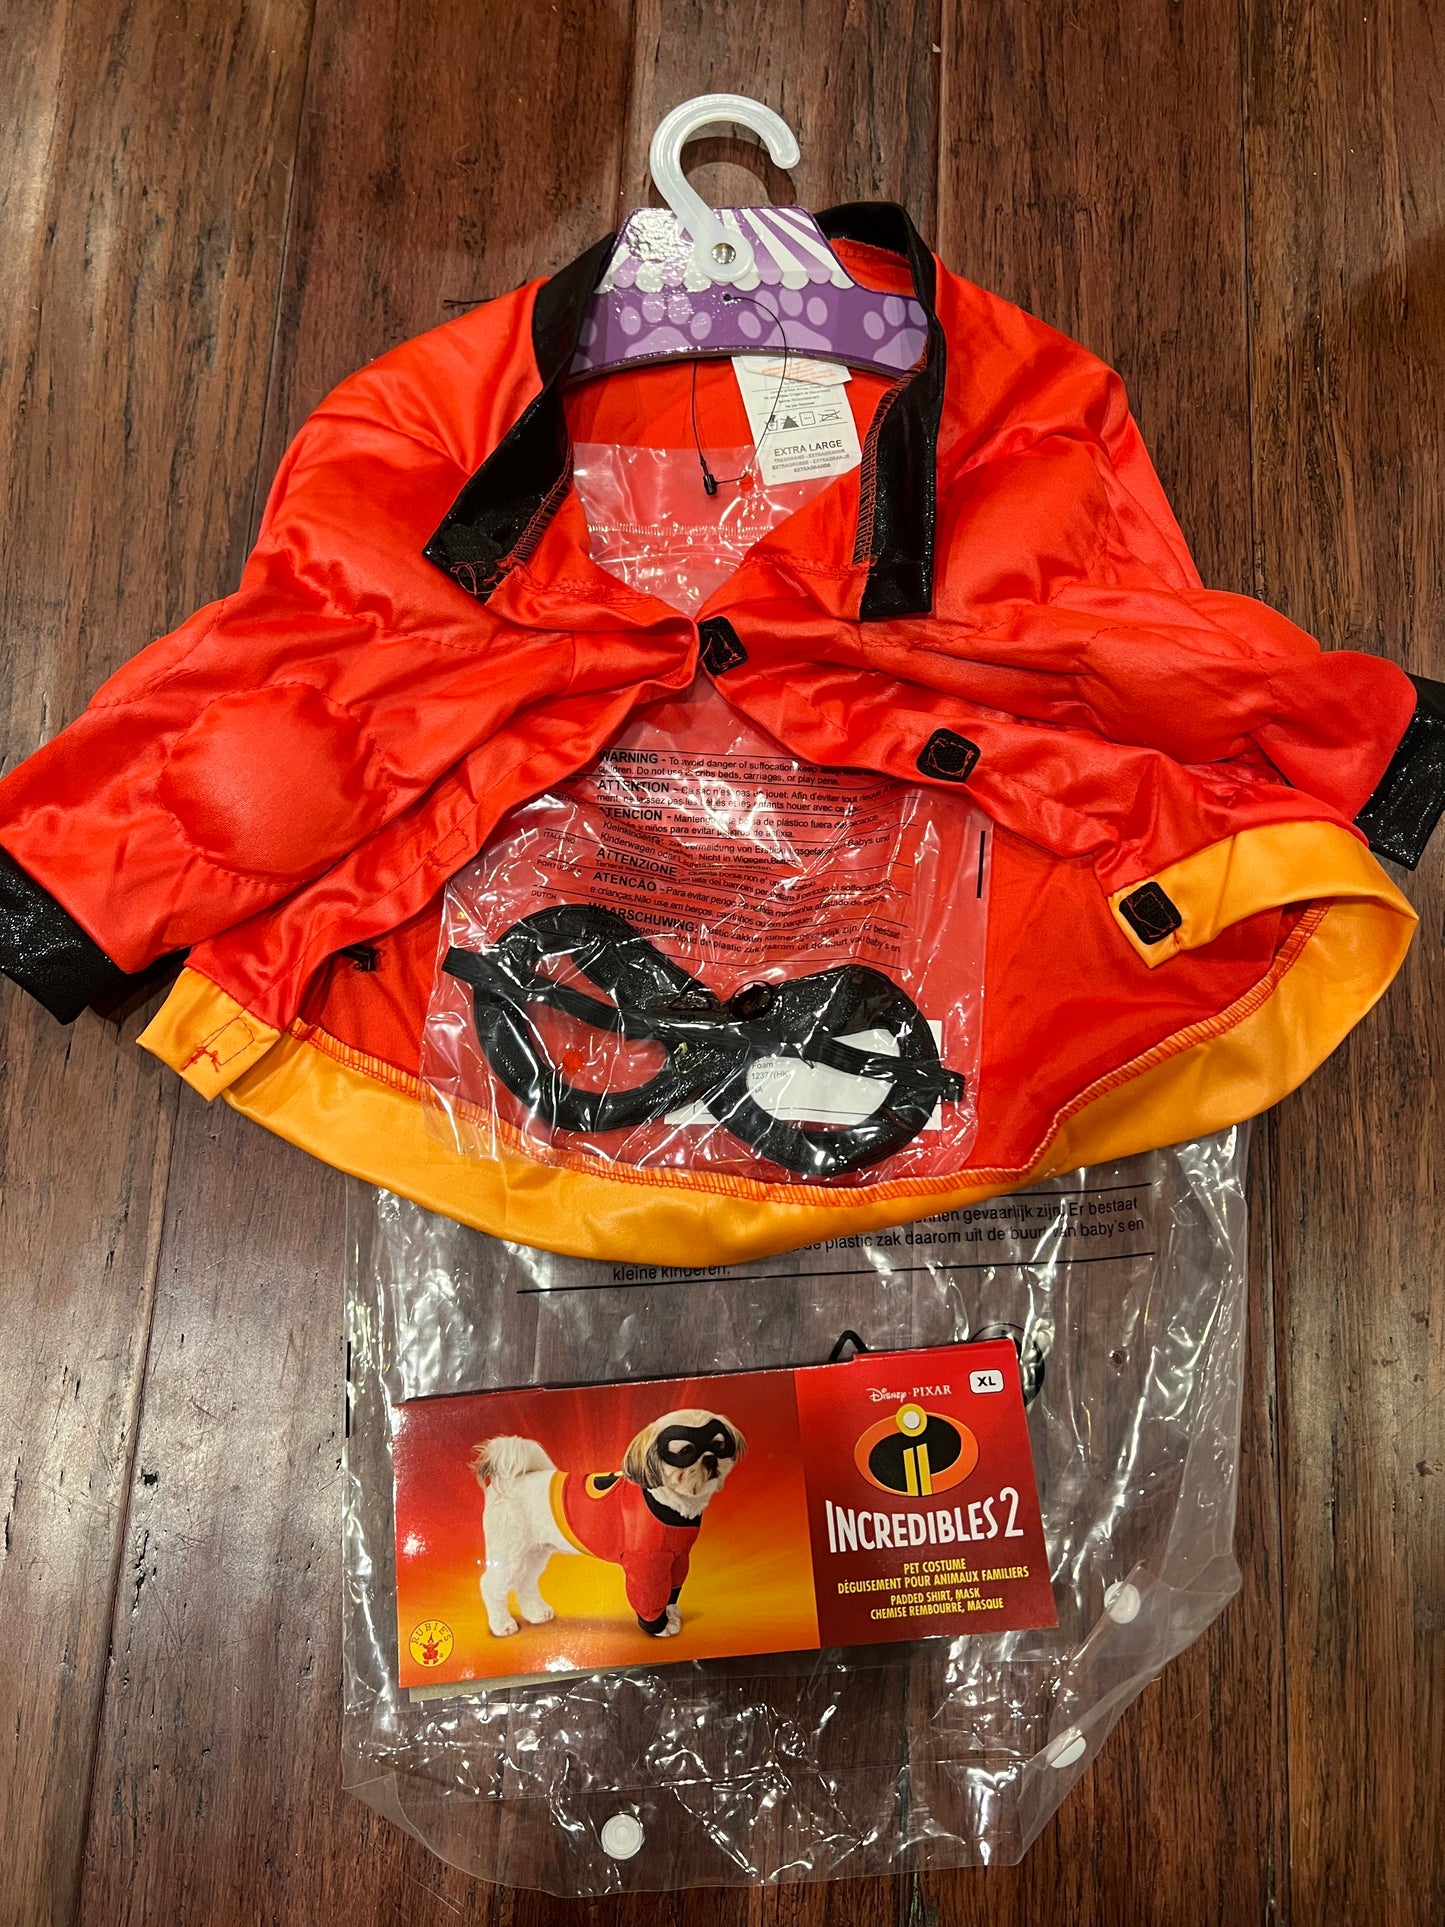 XL Dog Incredibles Costume NWT PPU Anderson